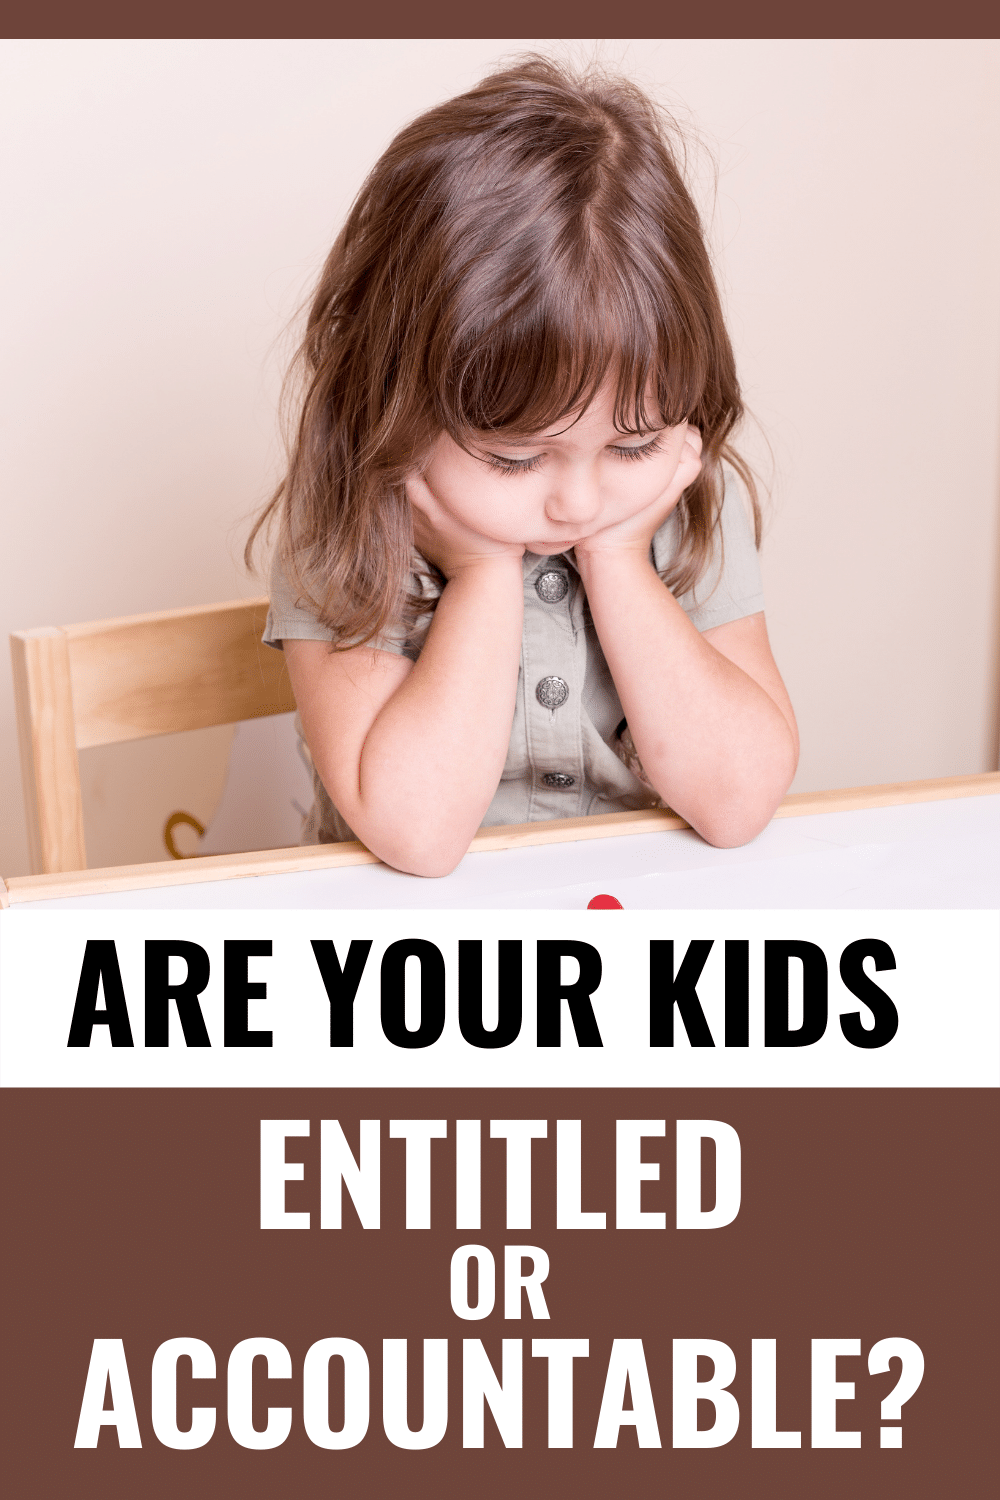 Are your kids entitled or are you holding your kids accountable? Learn to take the steps to ensure you enrich your kids' lives and those around them. #parentingtips #entitledkids #accountable via @wondermomwannab